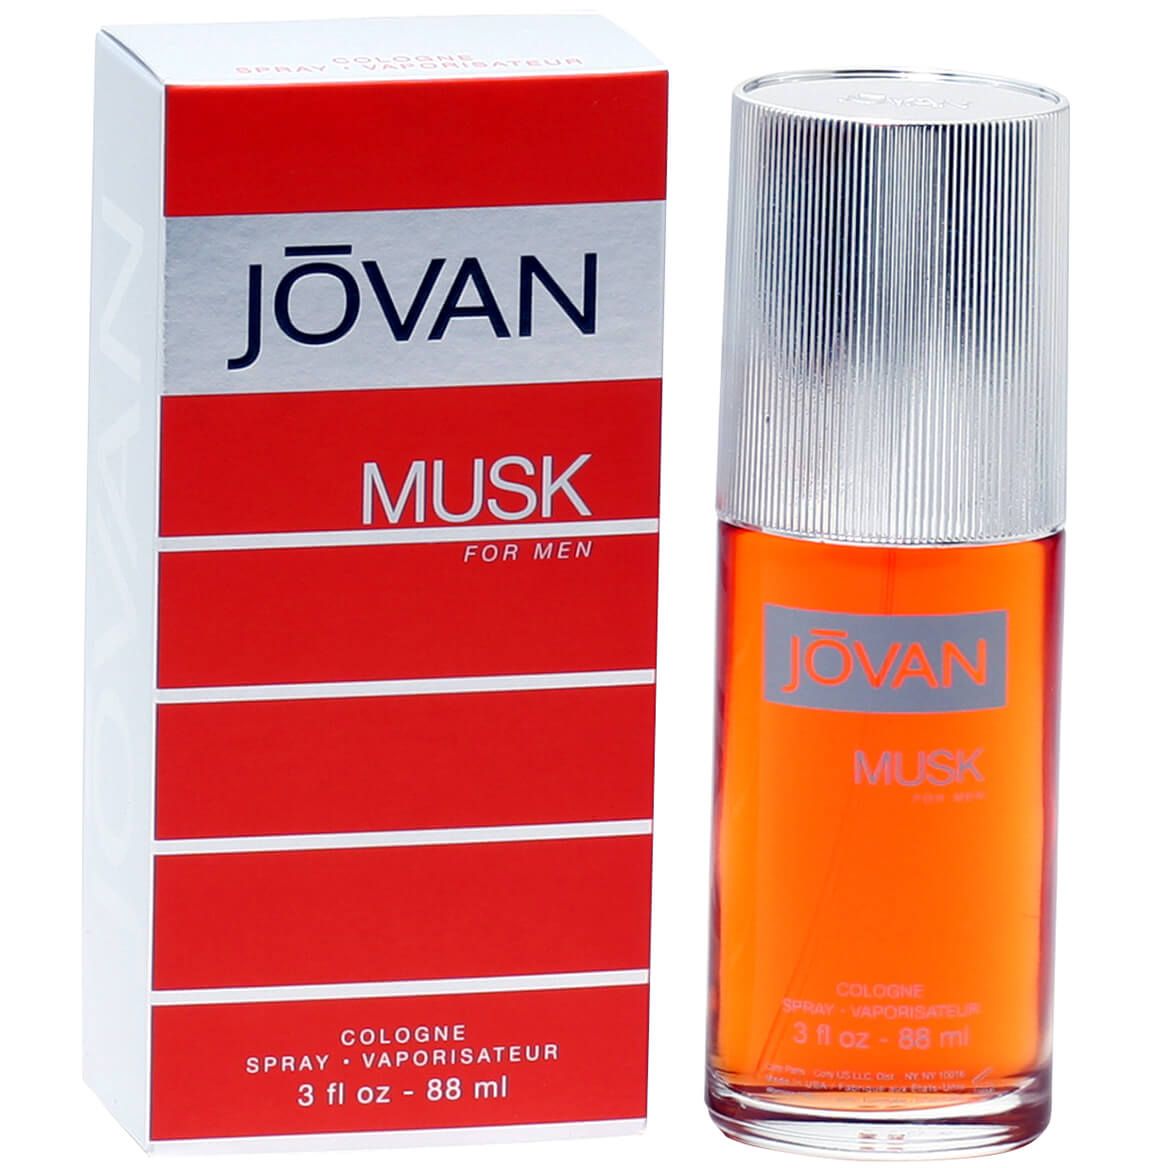 Jovan Musk For Men by Coty, Cologne Spray + '-' + 352177